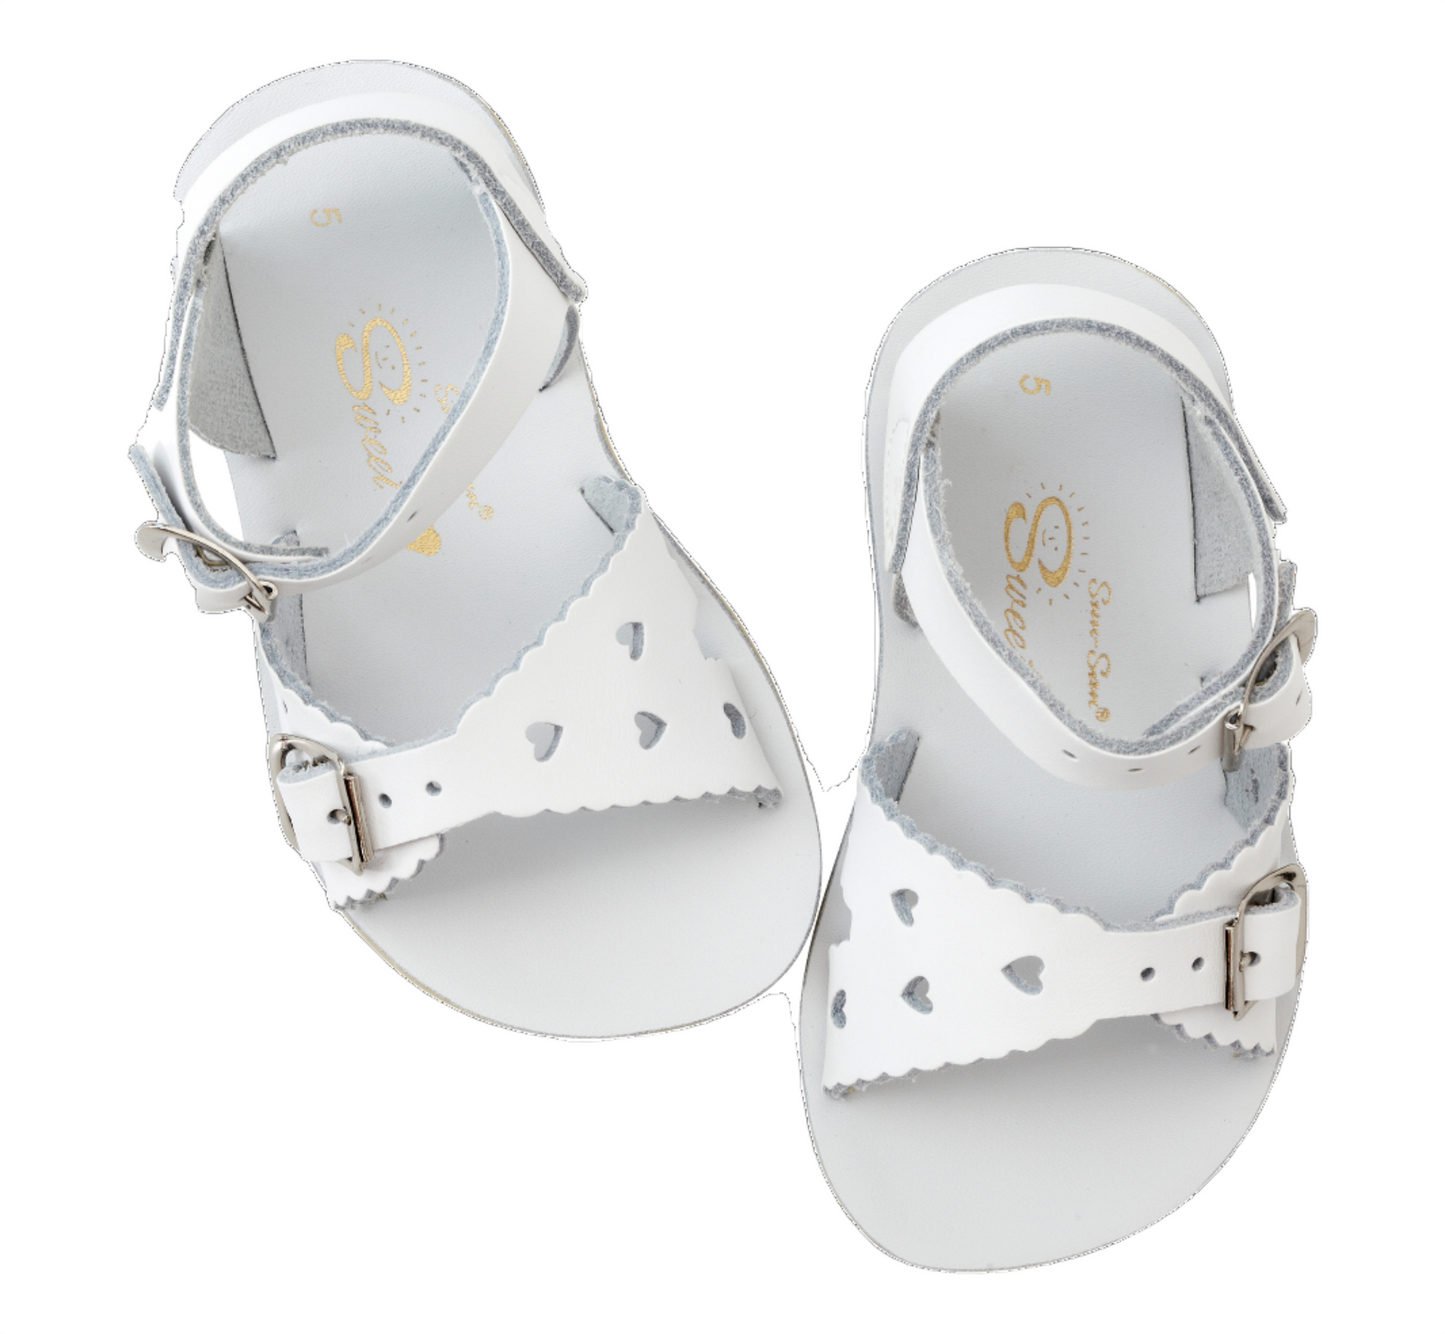 A girls sandal by Salt Water Sandal in white with double buckle fastening across the instep and around the ankle. Featuring scallop edge and punched out heart detail. Top view.